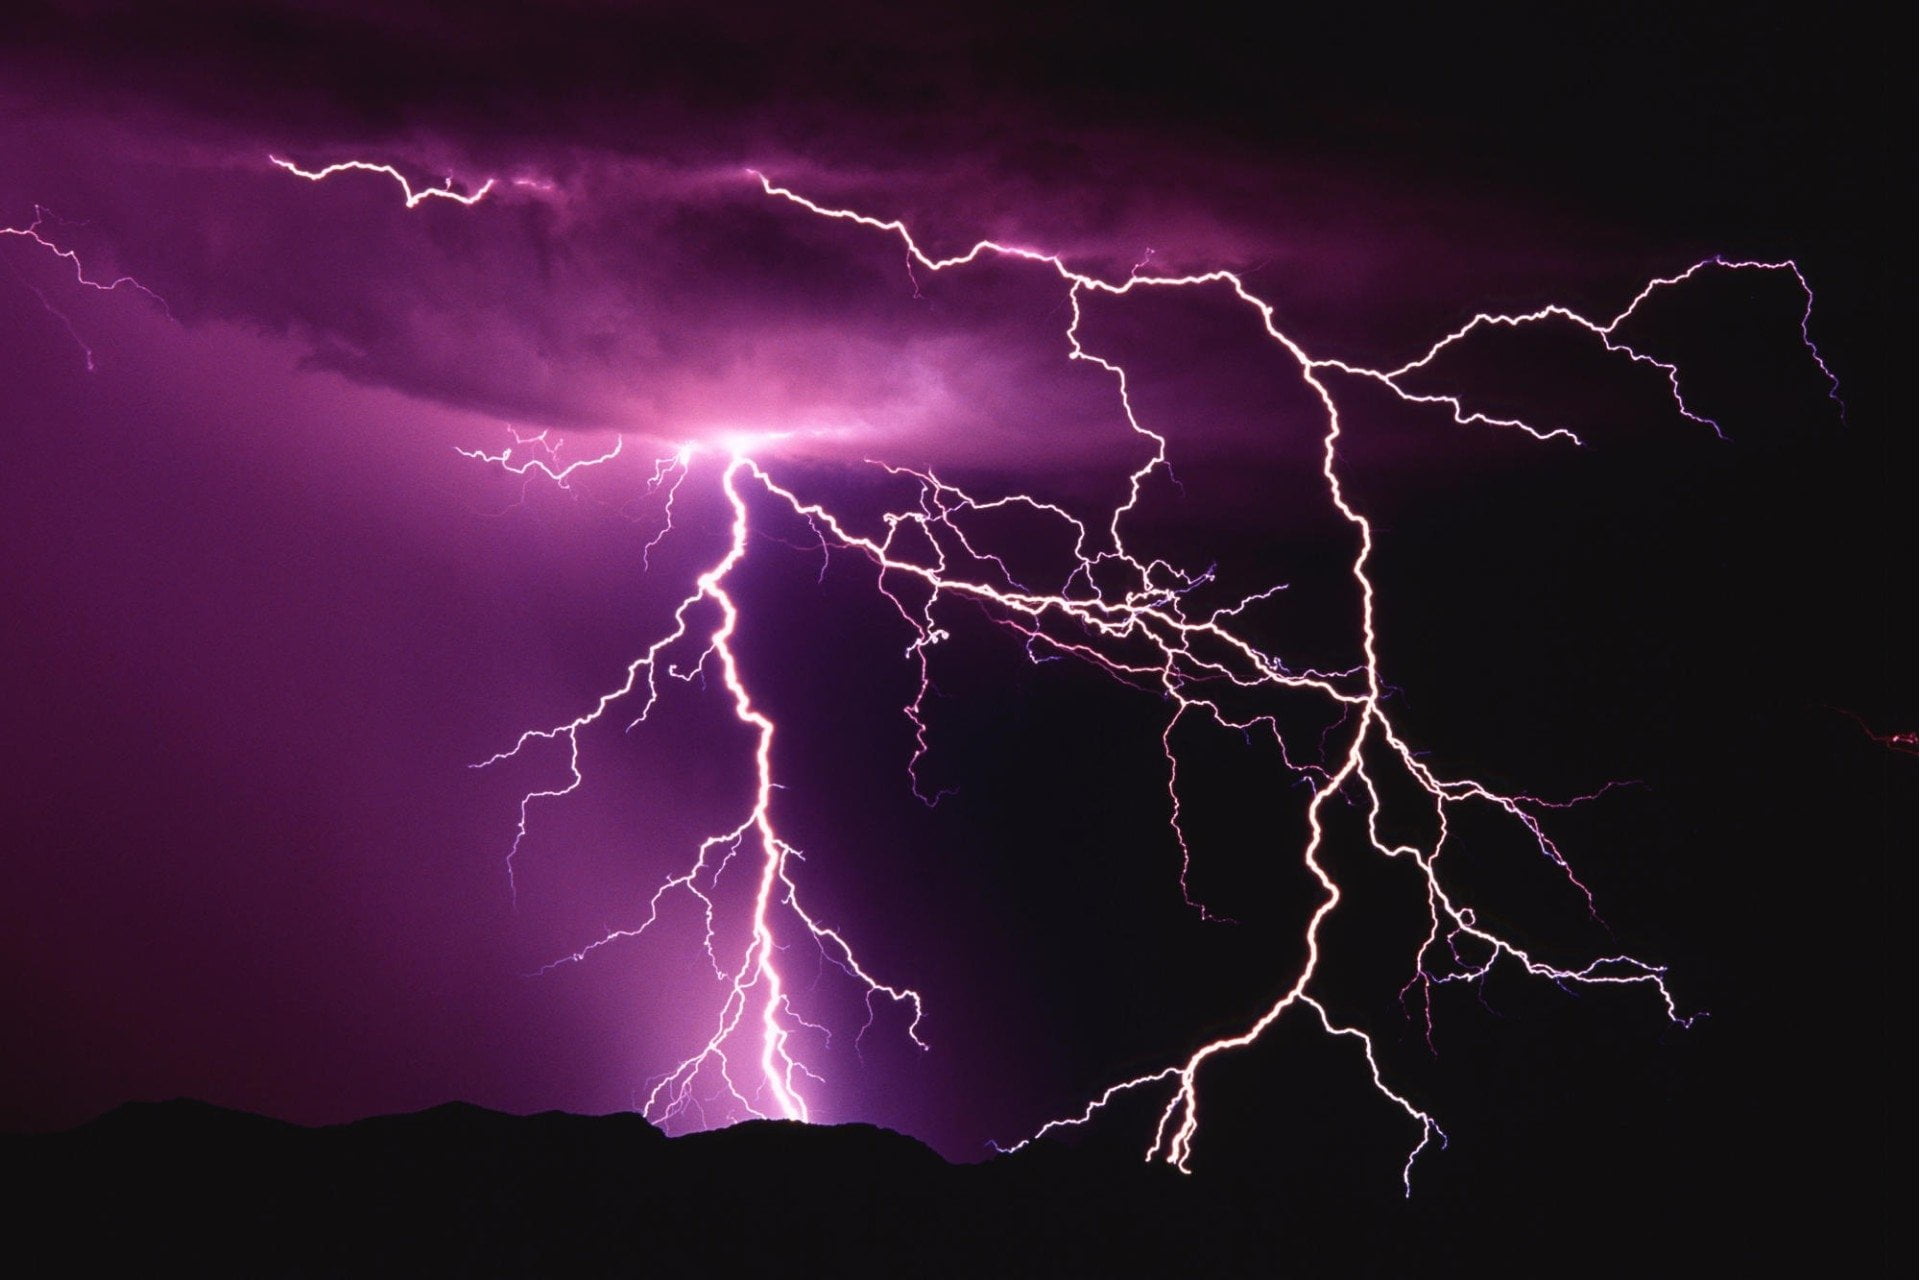 purple lightning, Photography, power in nature, storm, cloud - sky